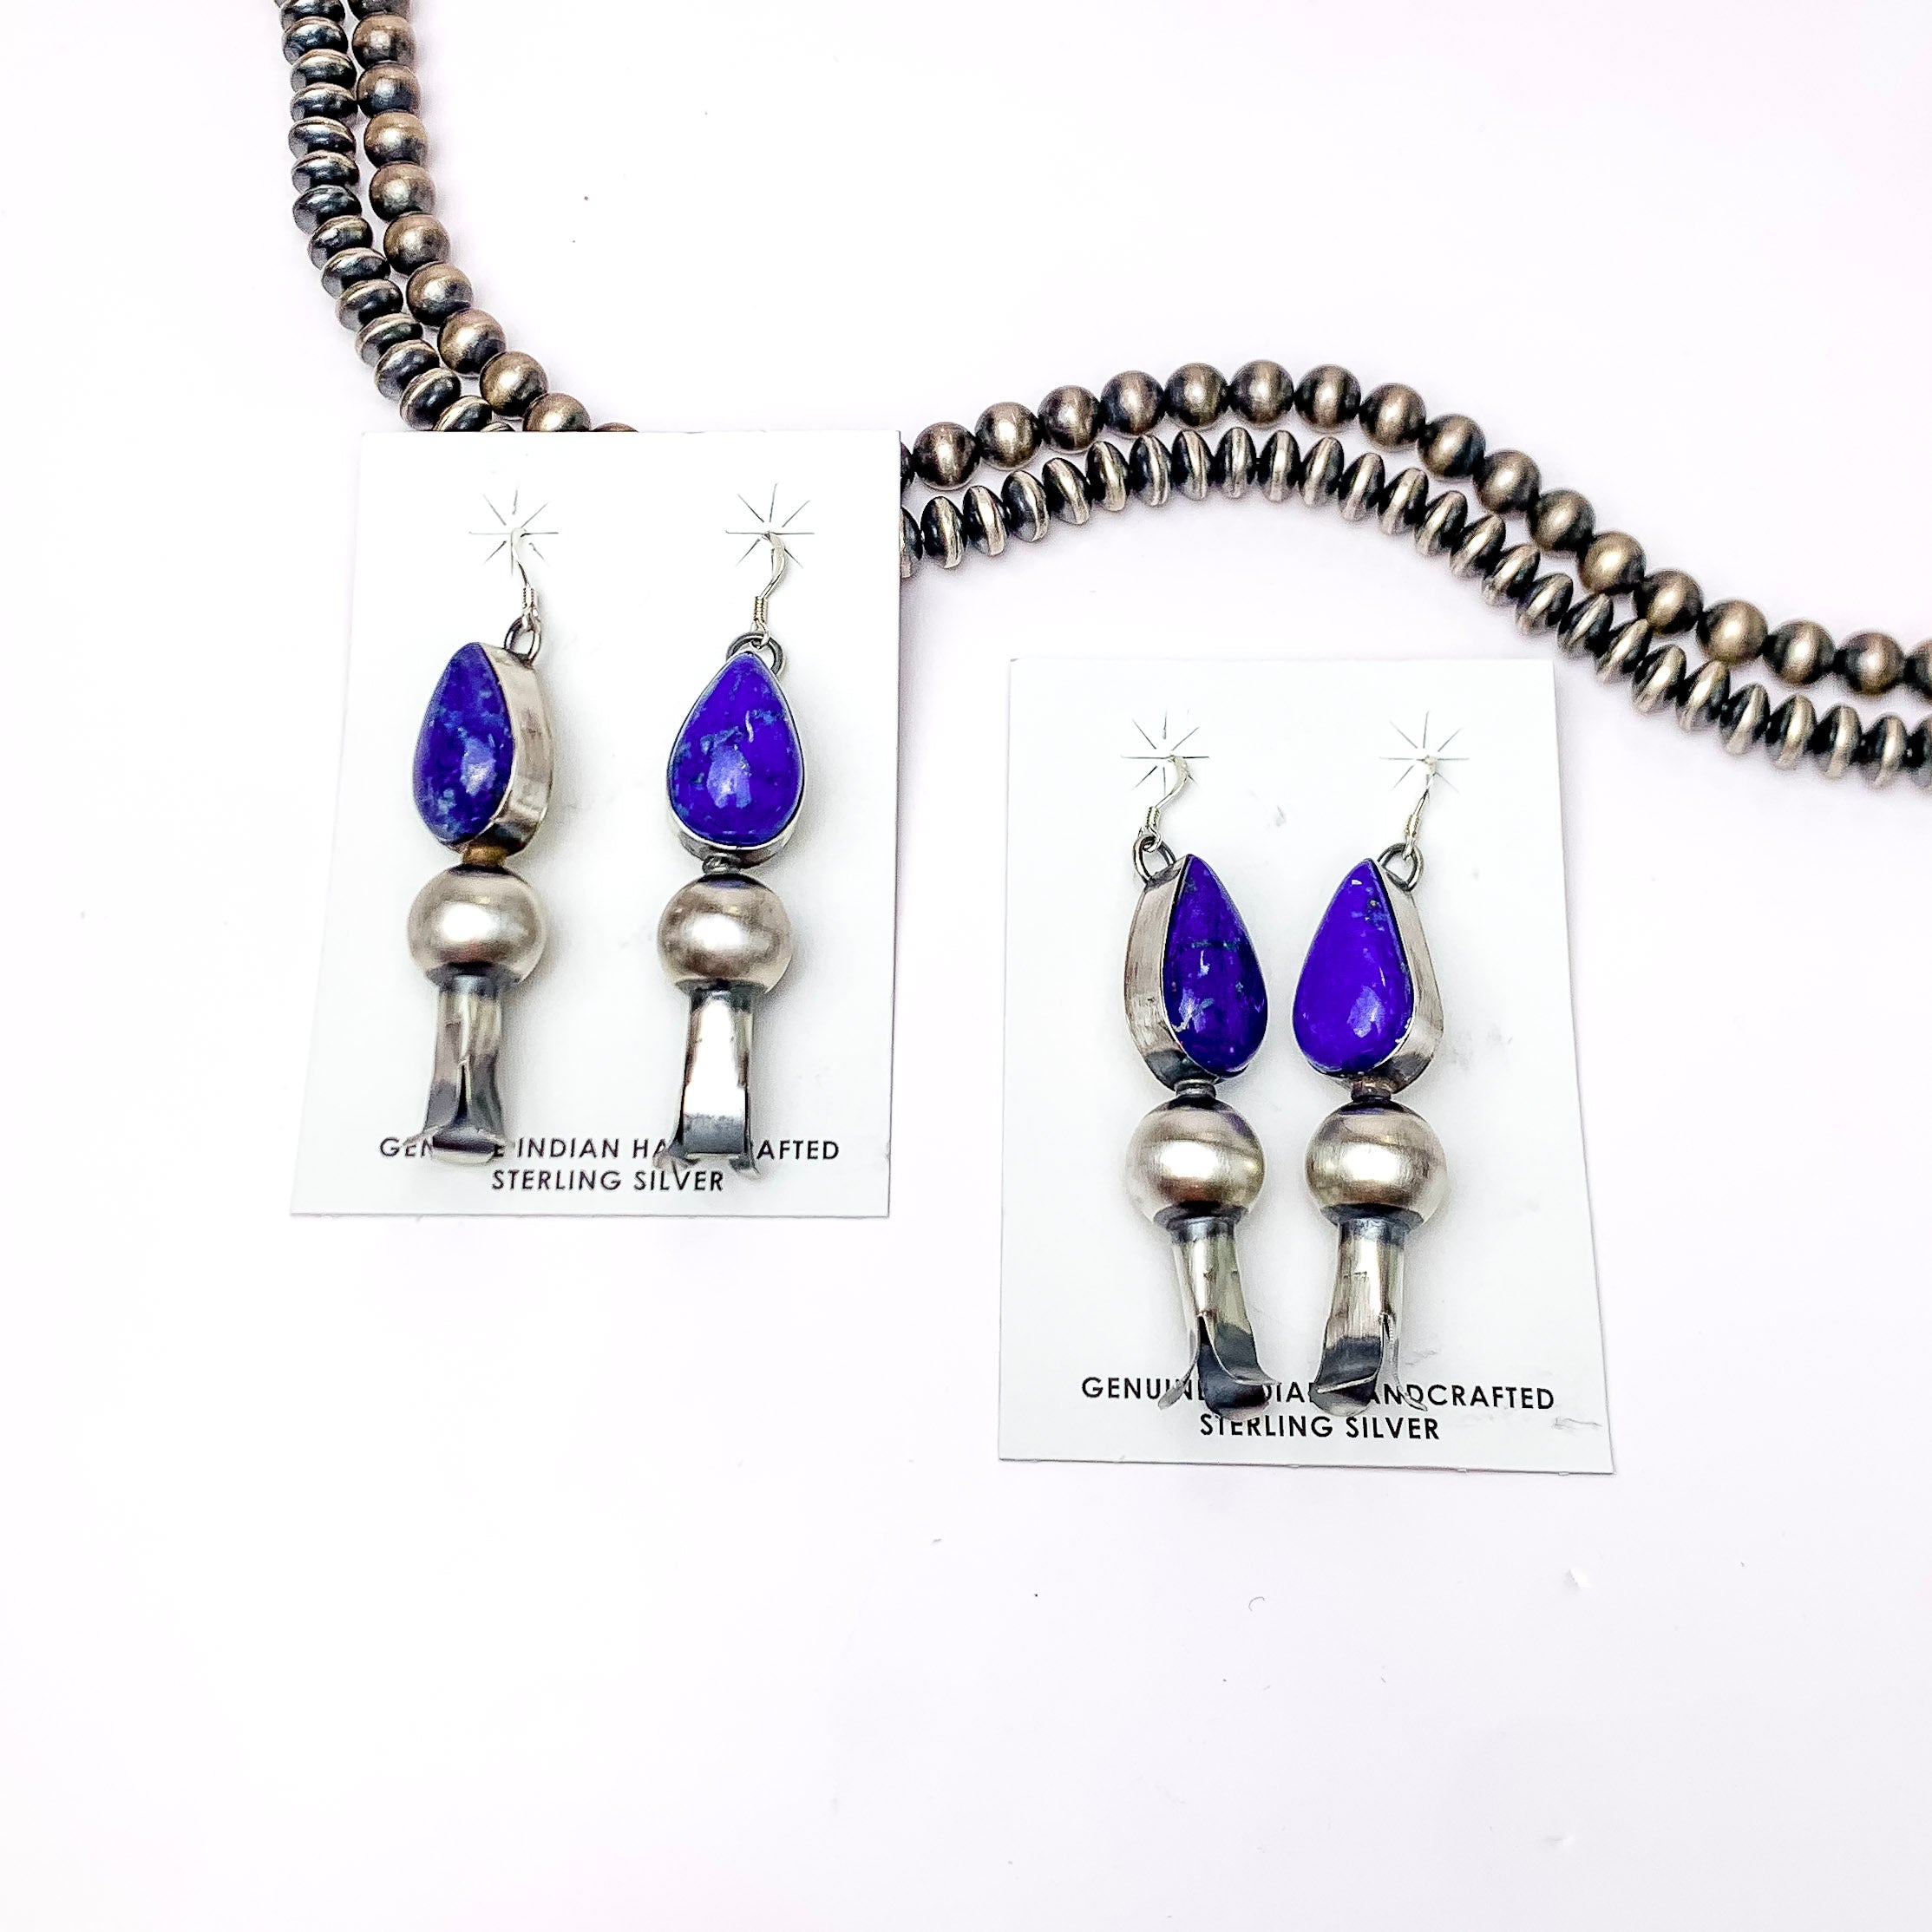 Mason Lee | Navajo Handmade Sterling Silver Dark Lapis Earrings with Squash Blossom Dangle - Giddy Up Glamour Boutique